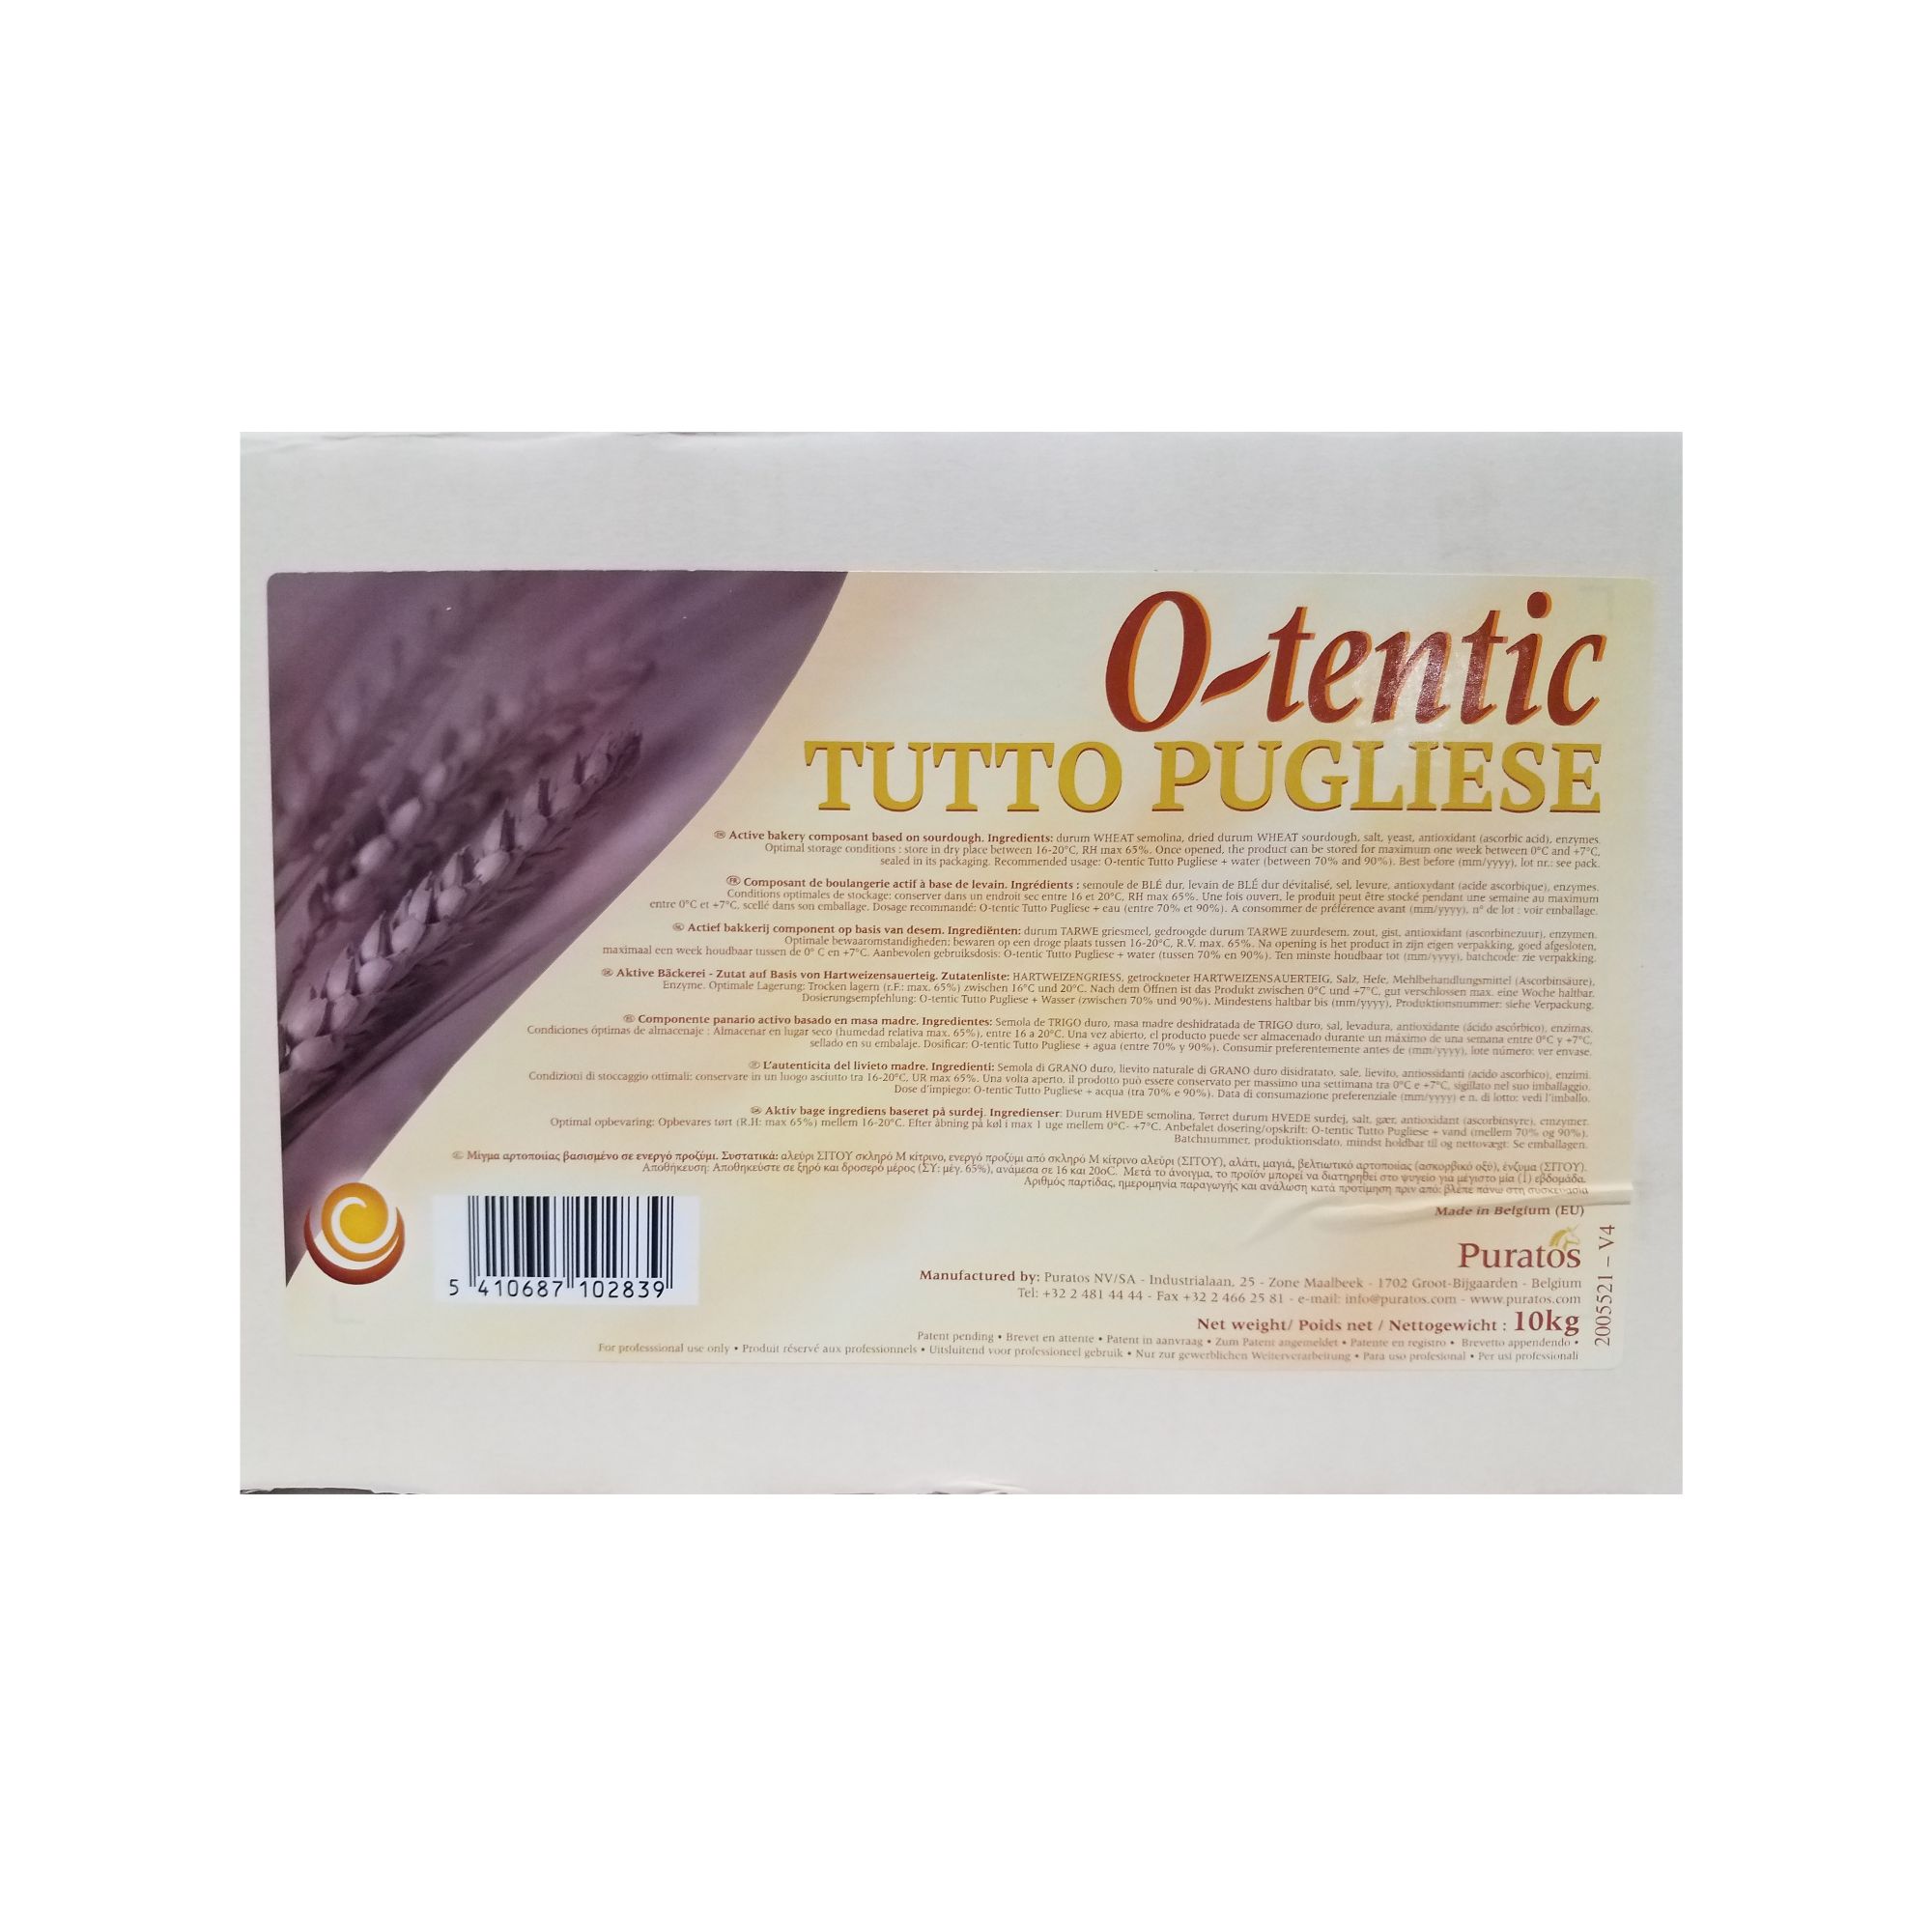 OTENTIC TUTTO PUGLIESE 22LB - South Holland Bakery Supply